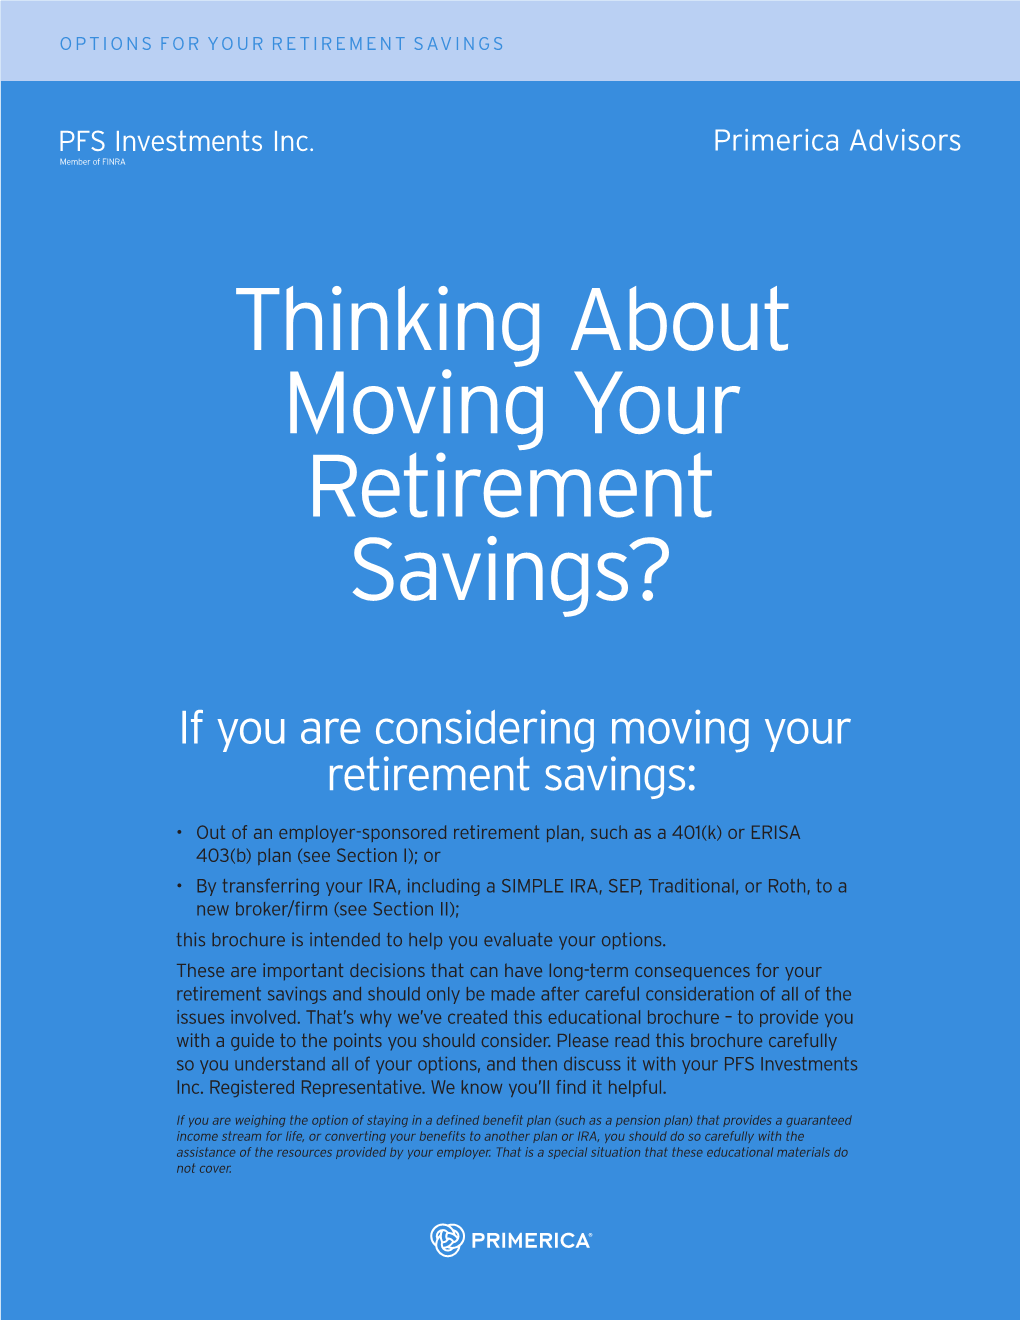 Thinking About Moving Your Retirement Savings?